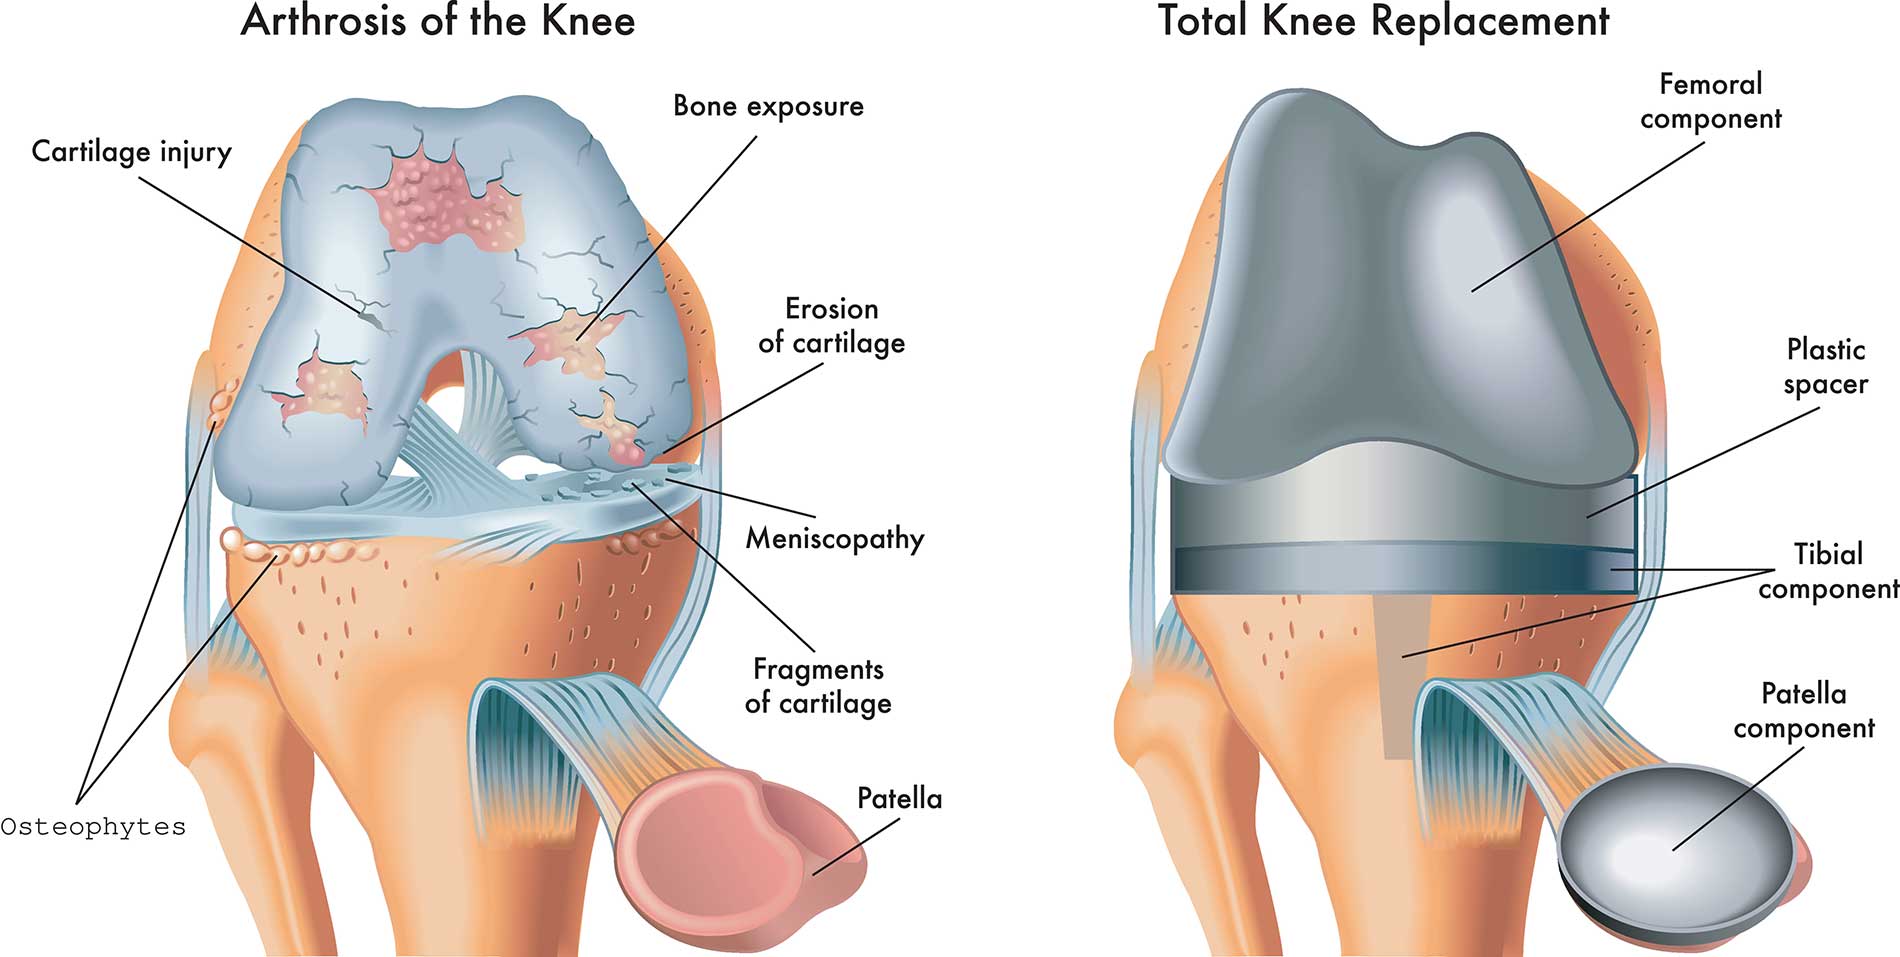 featuredimage-Everything-You-Need-to-Know-About-Knee-Replacement-Surgery